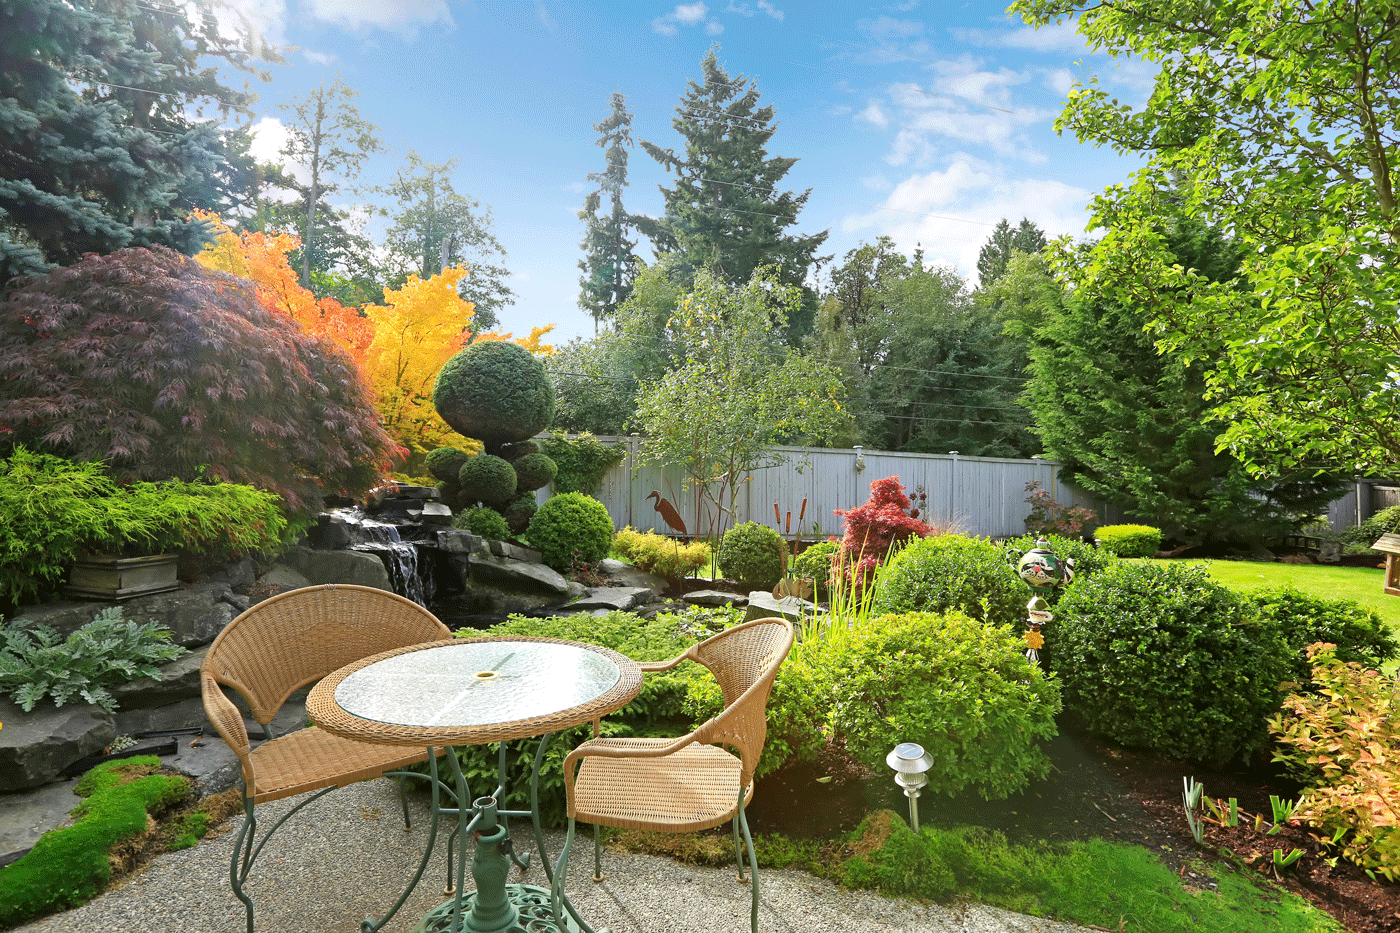 4 Backyard Ideas to Spruce Up Your Home - bhgrelife.com